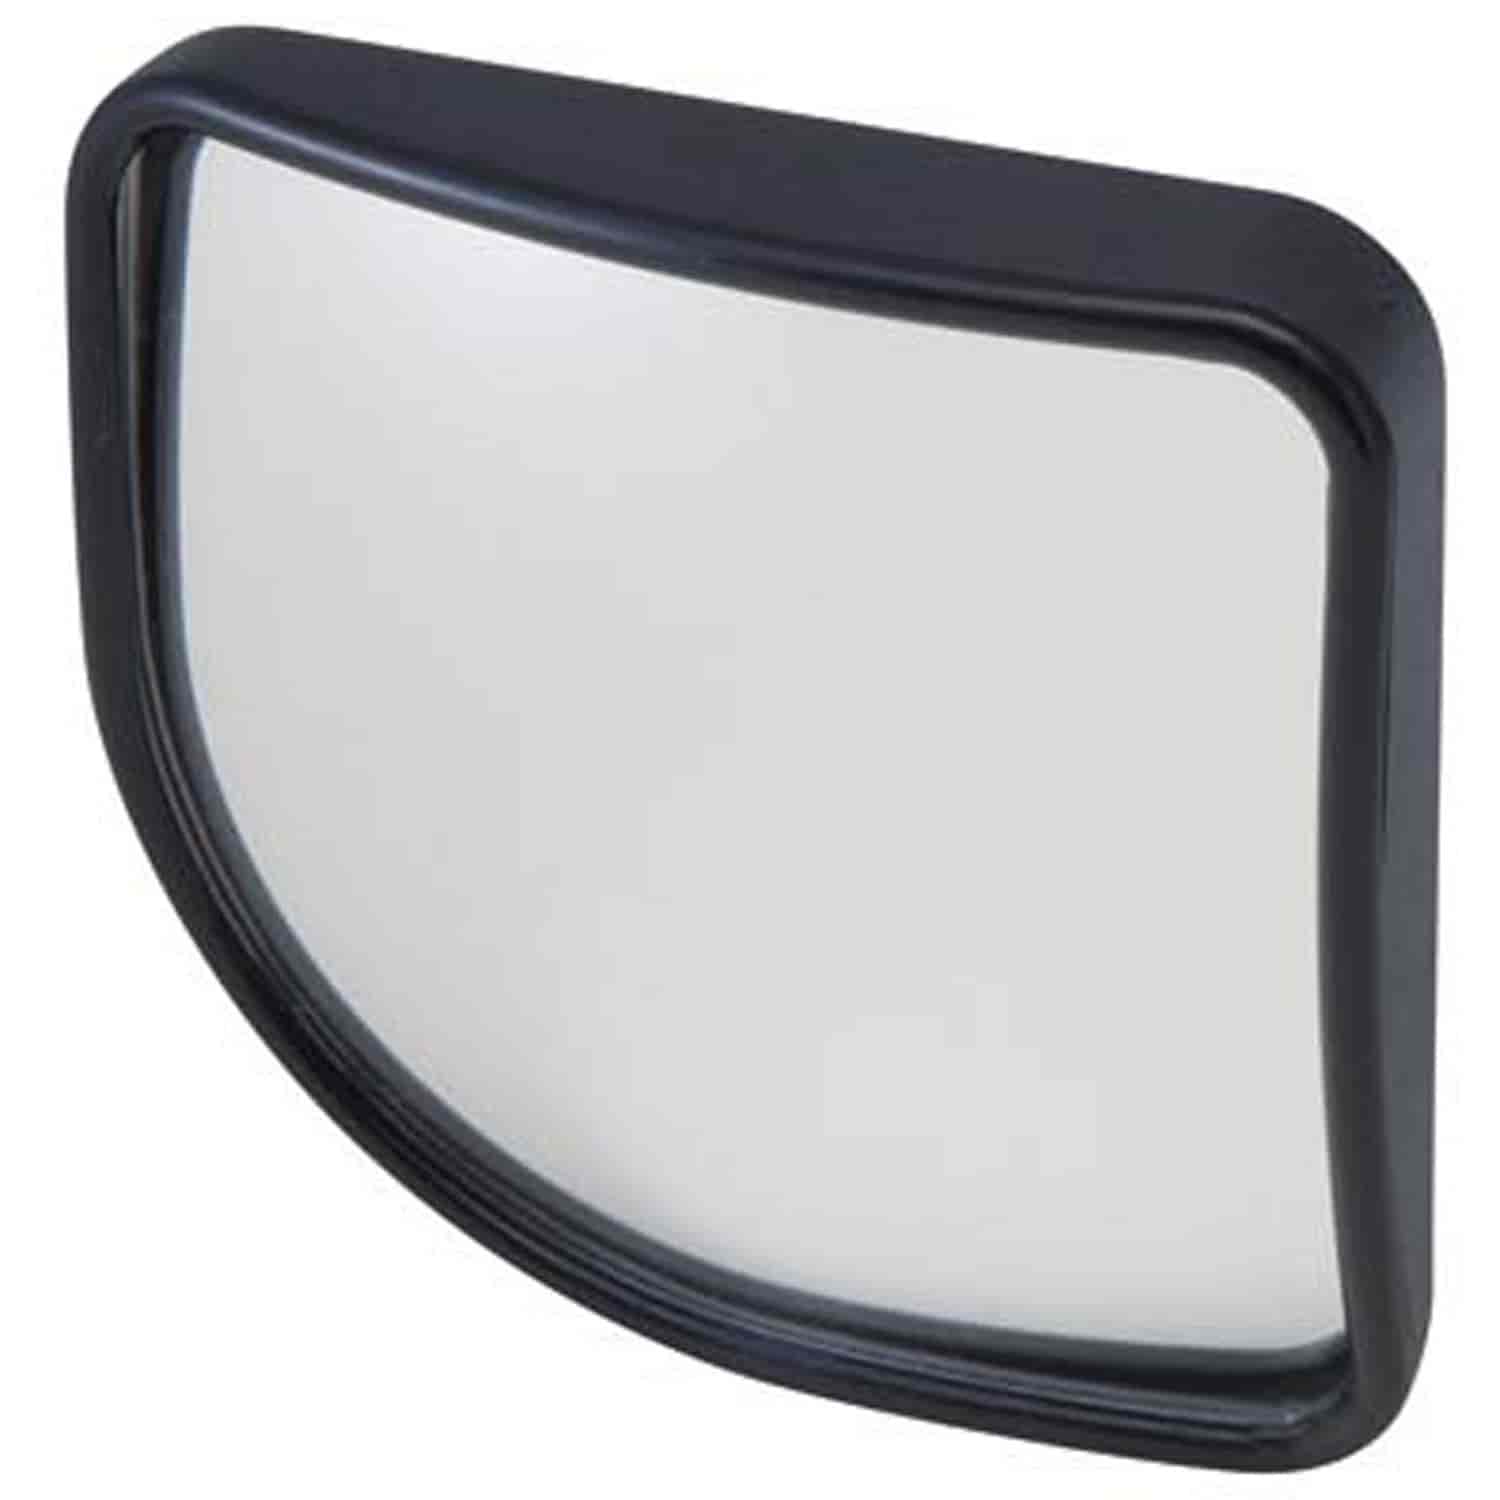 Spot Mirror 3 1/4 X 3 1/4 Wedge Easy Stick-on Installation Convex Lens increases visibility Includes